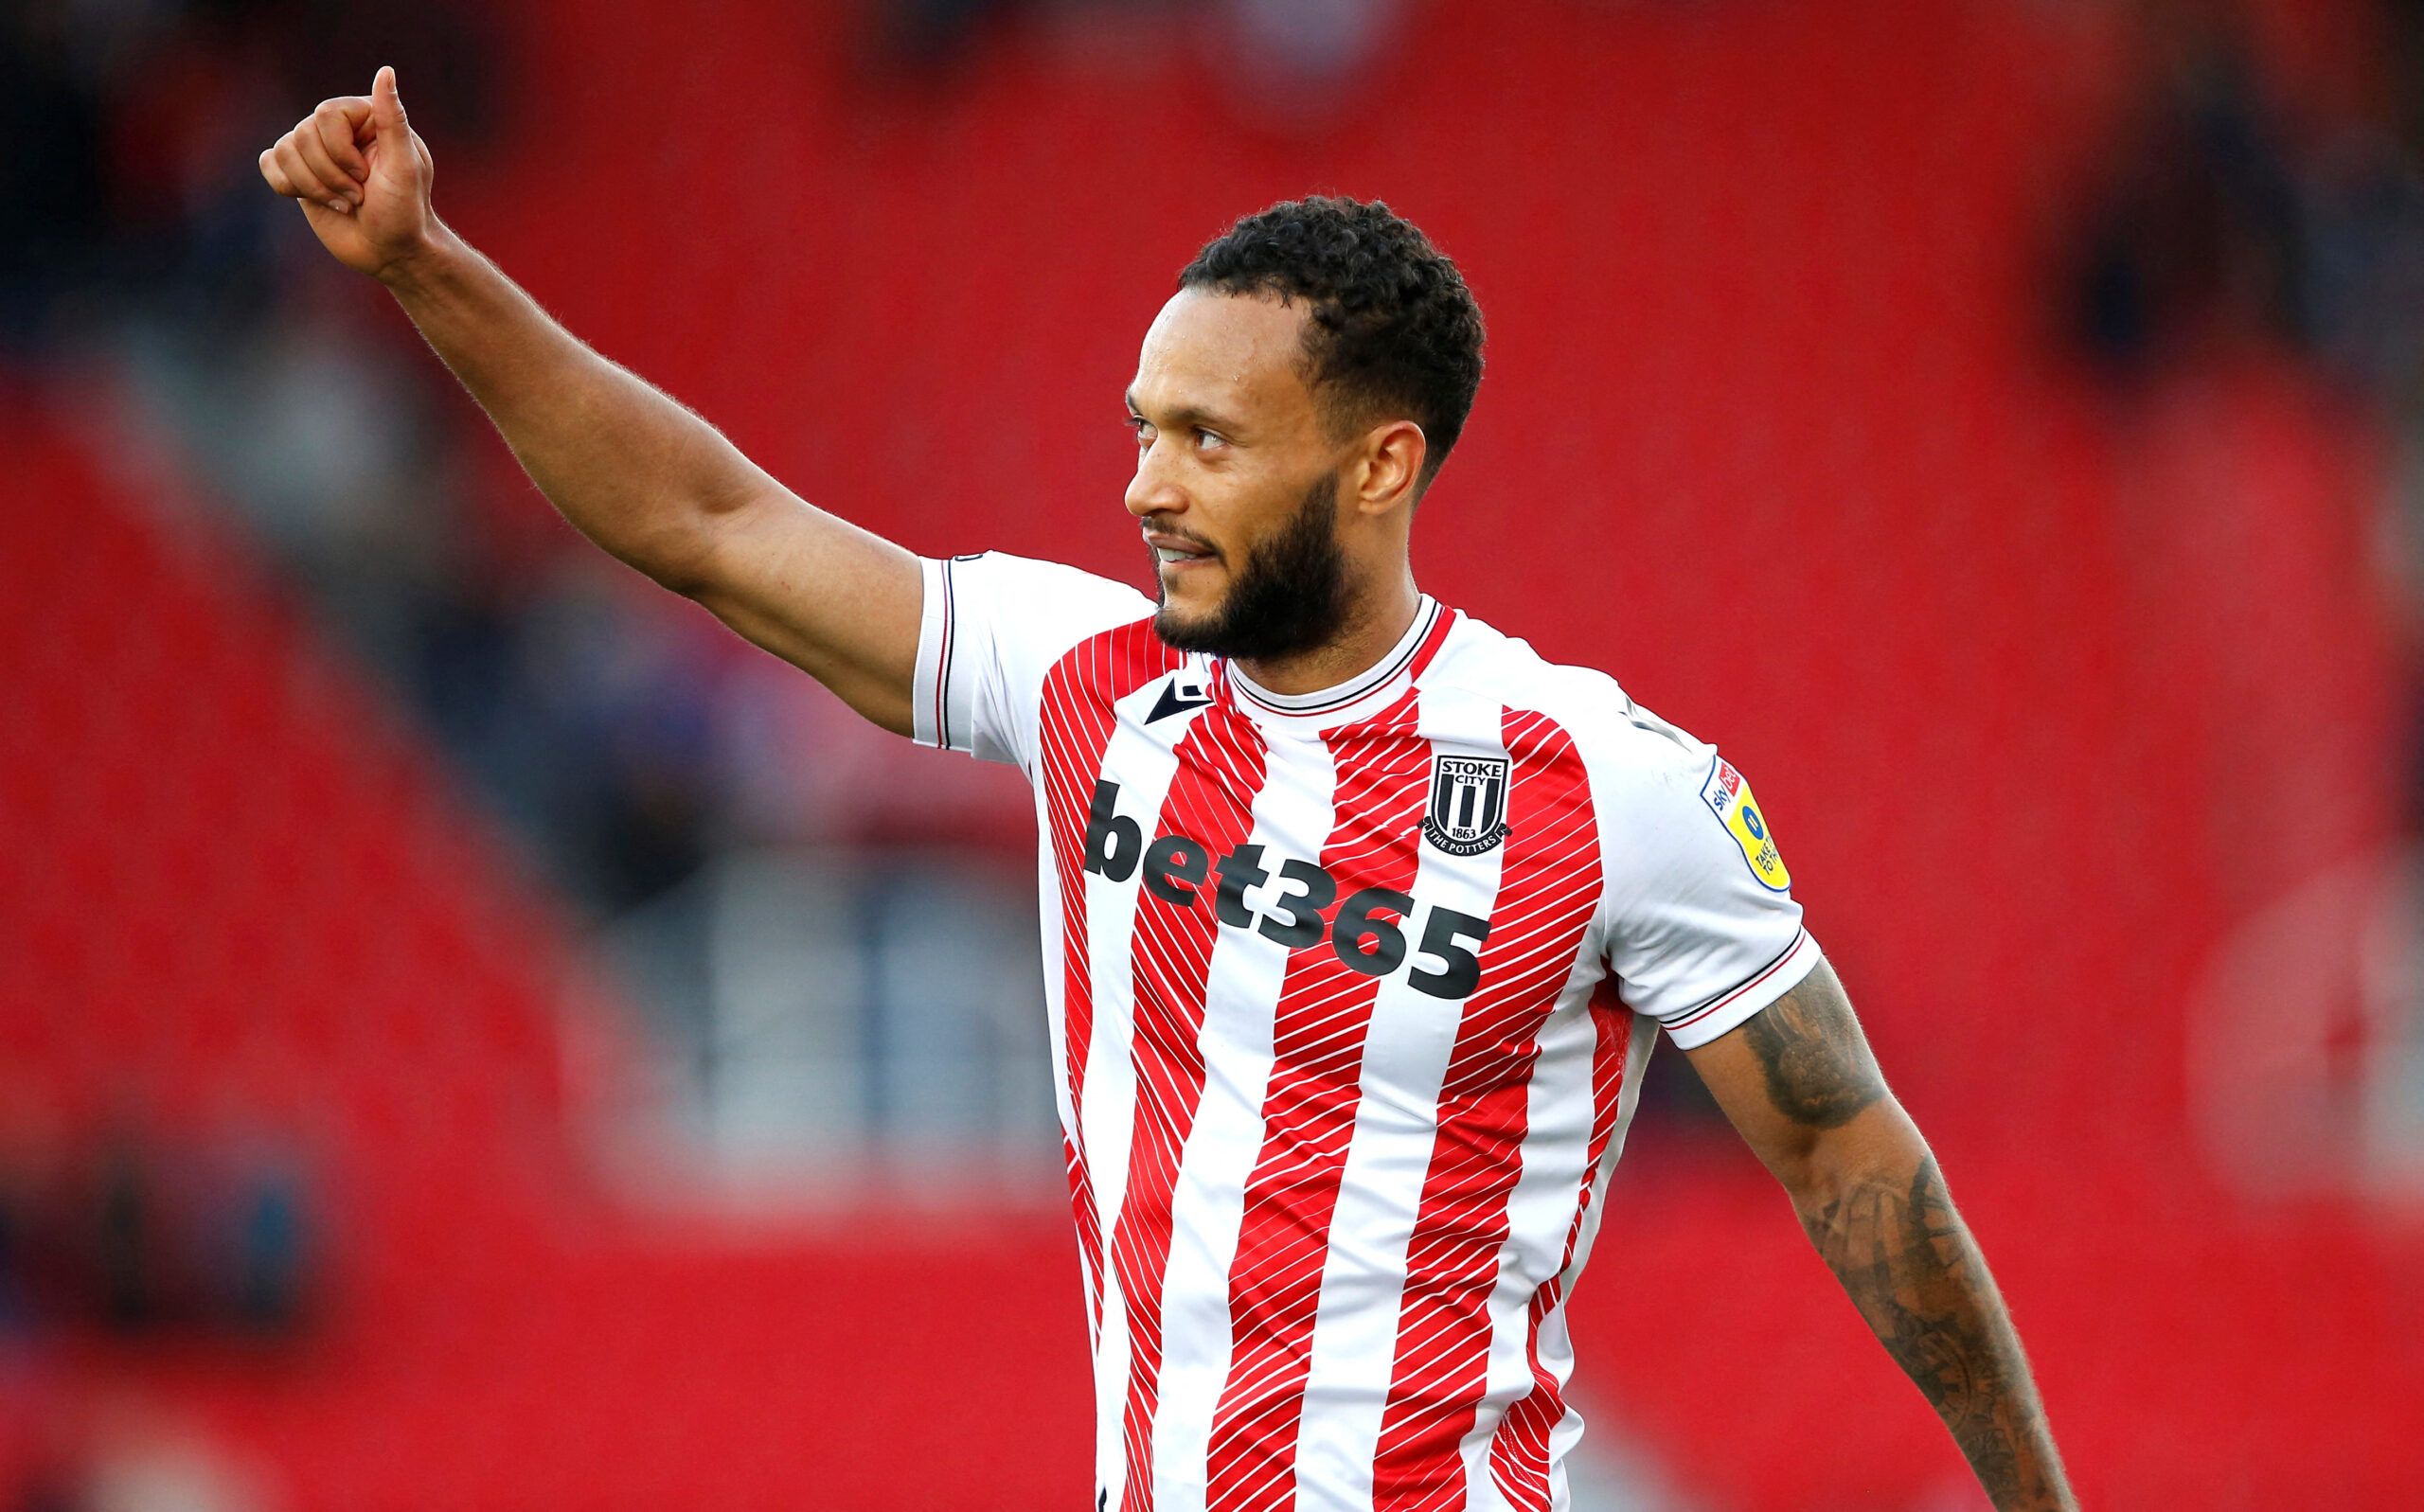 Soccer Football - Championship - Stoke City v Sheffield United - bet365 Stadium, Stoke-on-Trent, Britain - October 8, 2022 Stoke City's Lewis Baker acknowledges fans after the match   Action Images/Craig Brough  EDITORIAL USE ONLY. No use with unauthorized audio, video, data, fixture lists, club/league logos or 